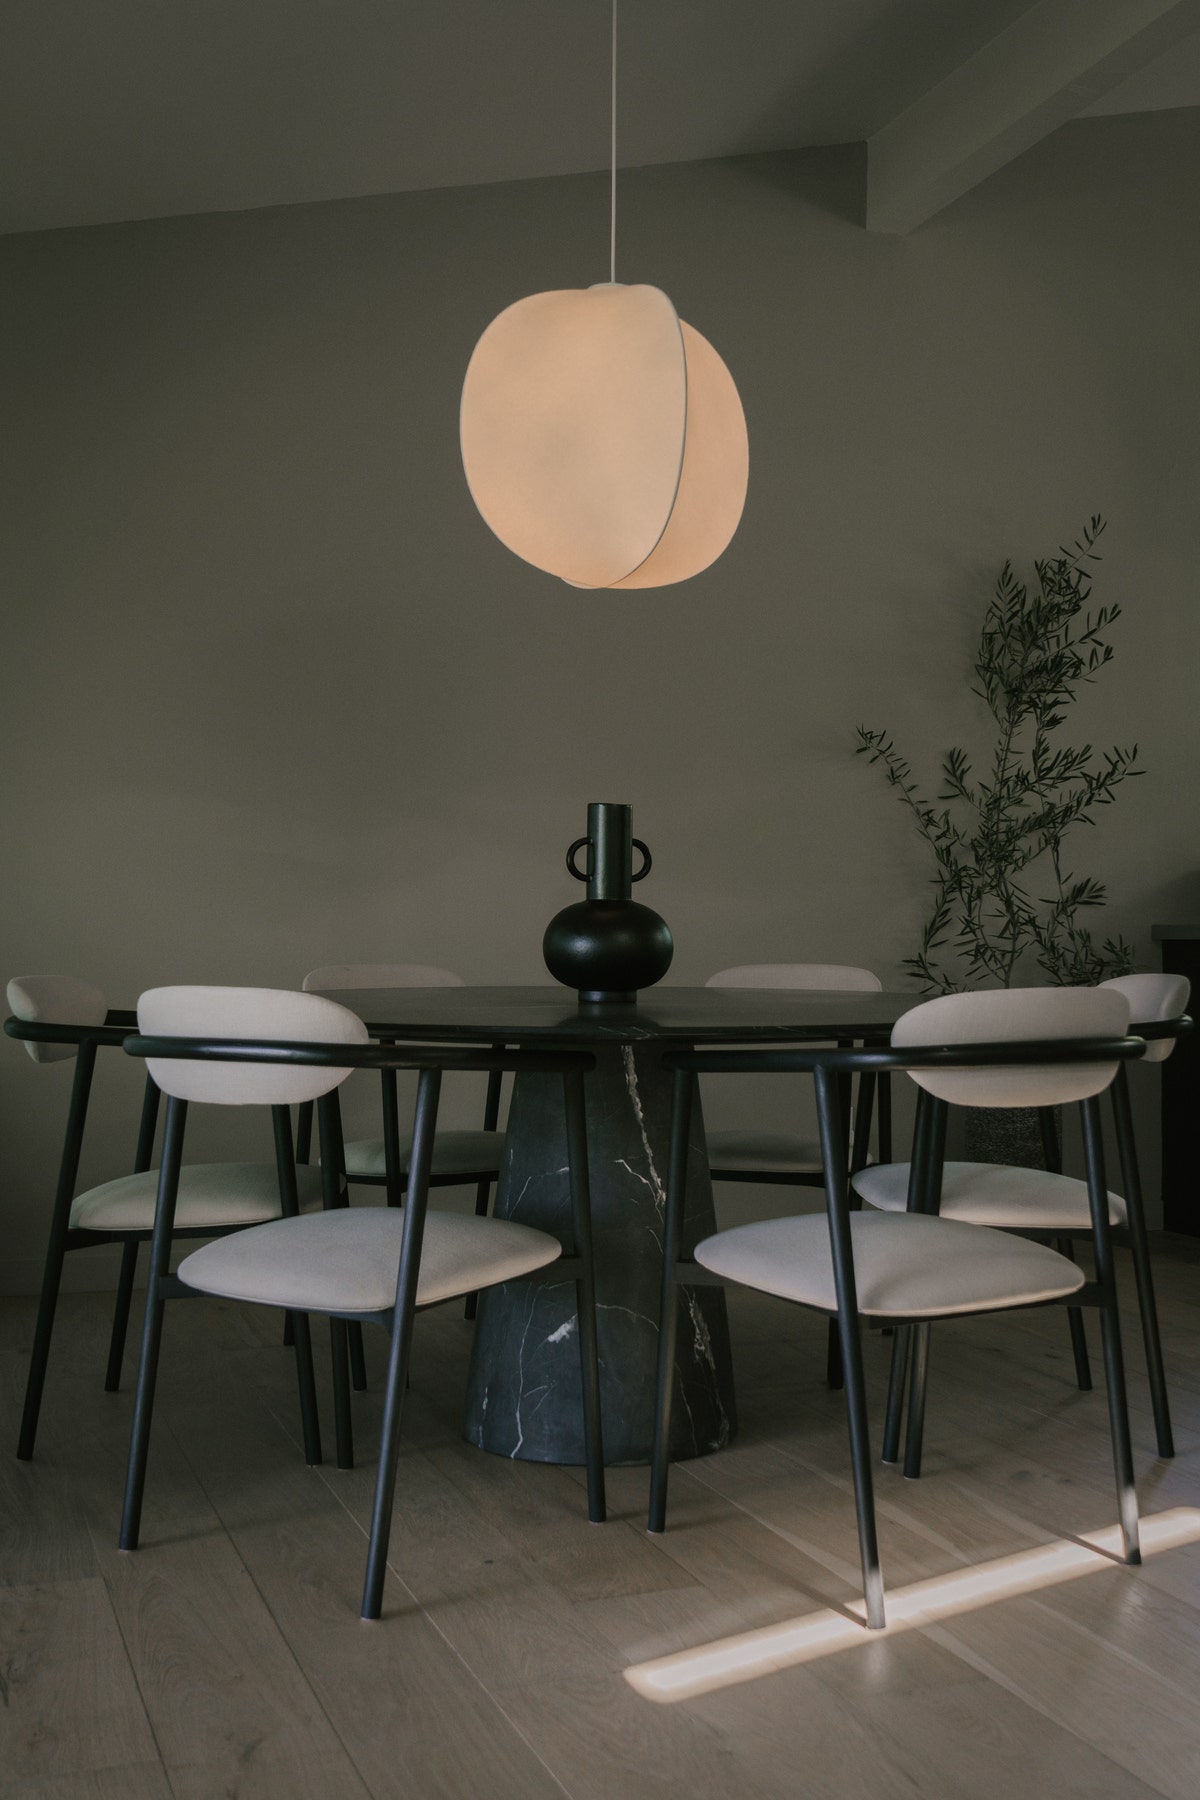 Glowing light above black dining table scene